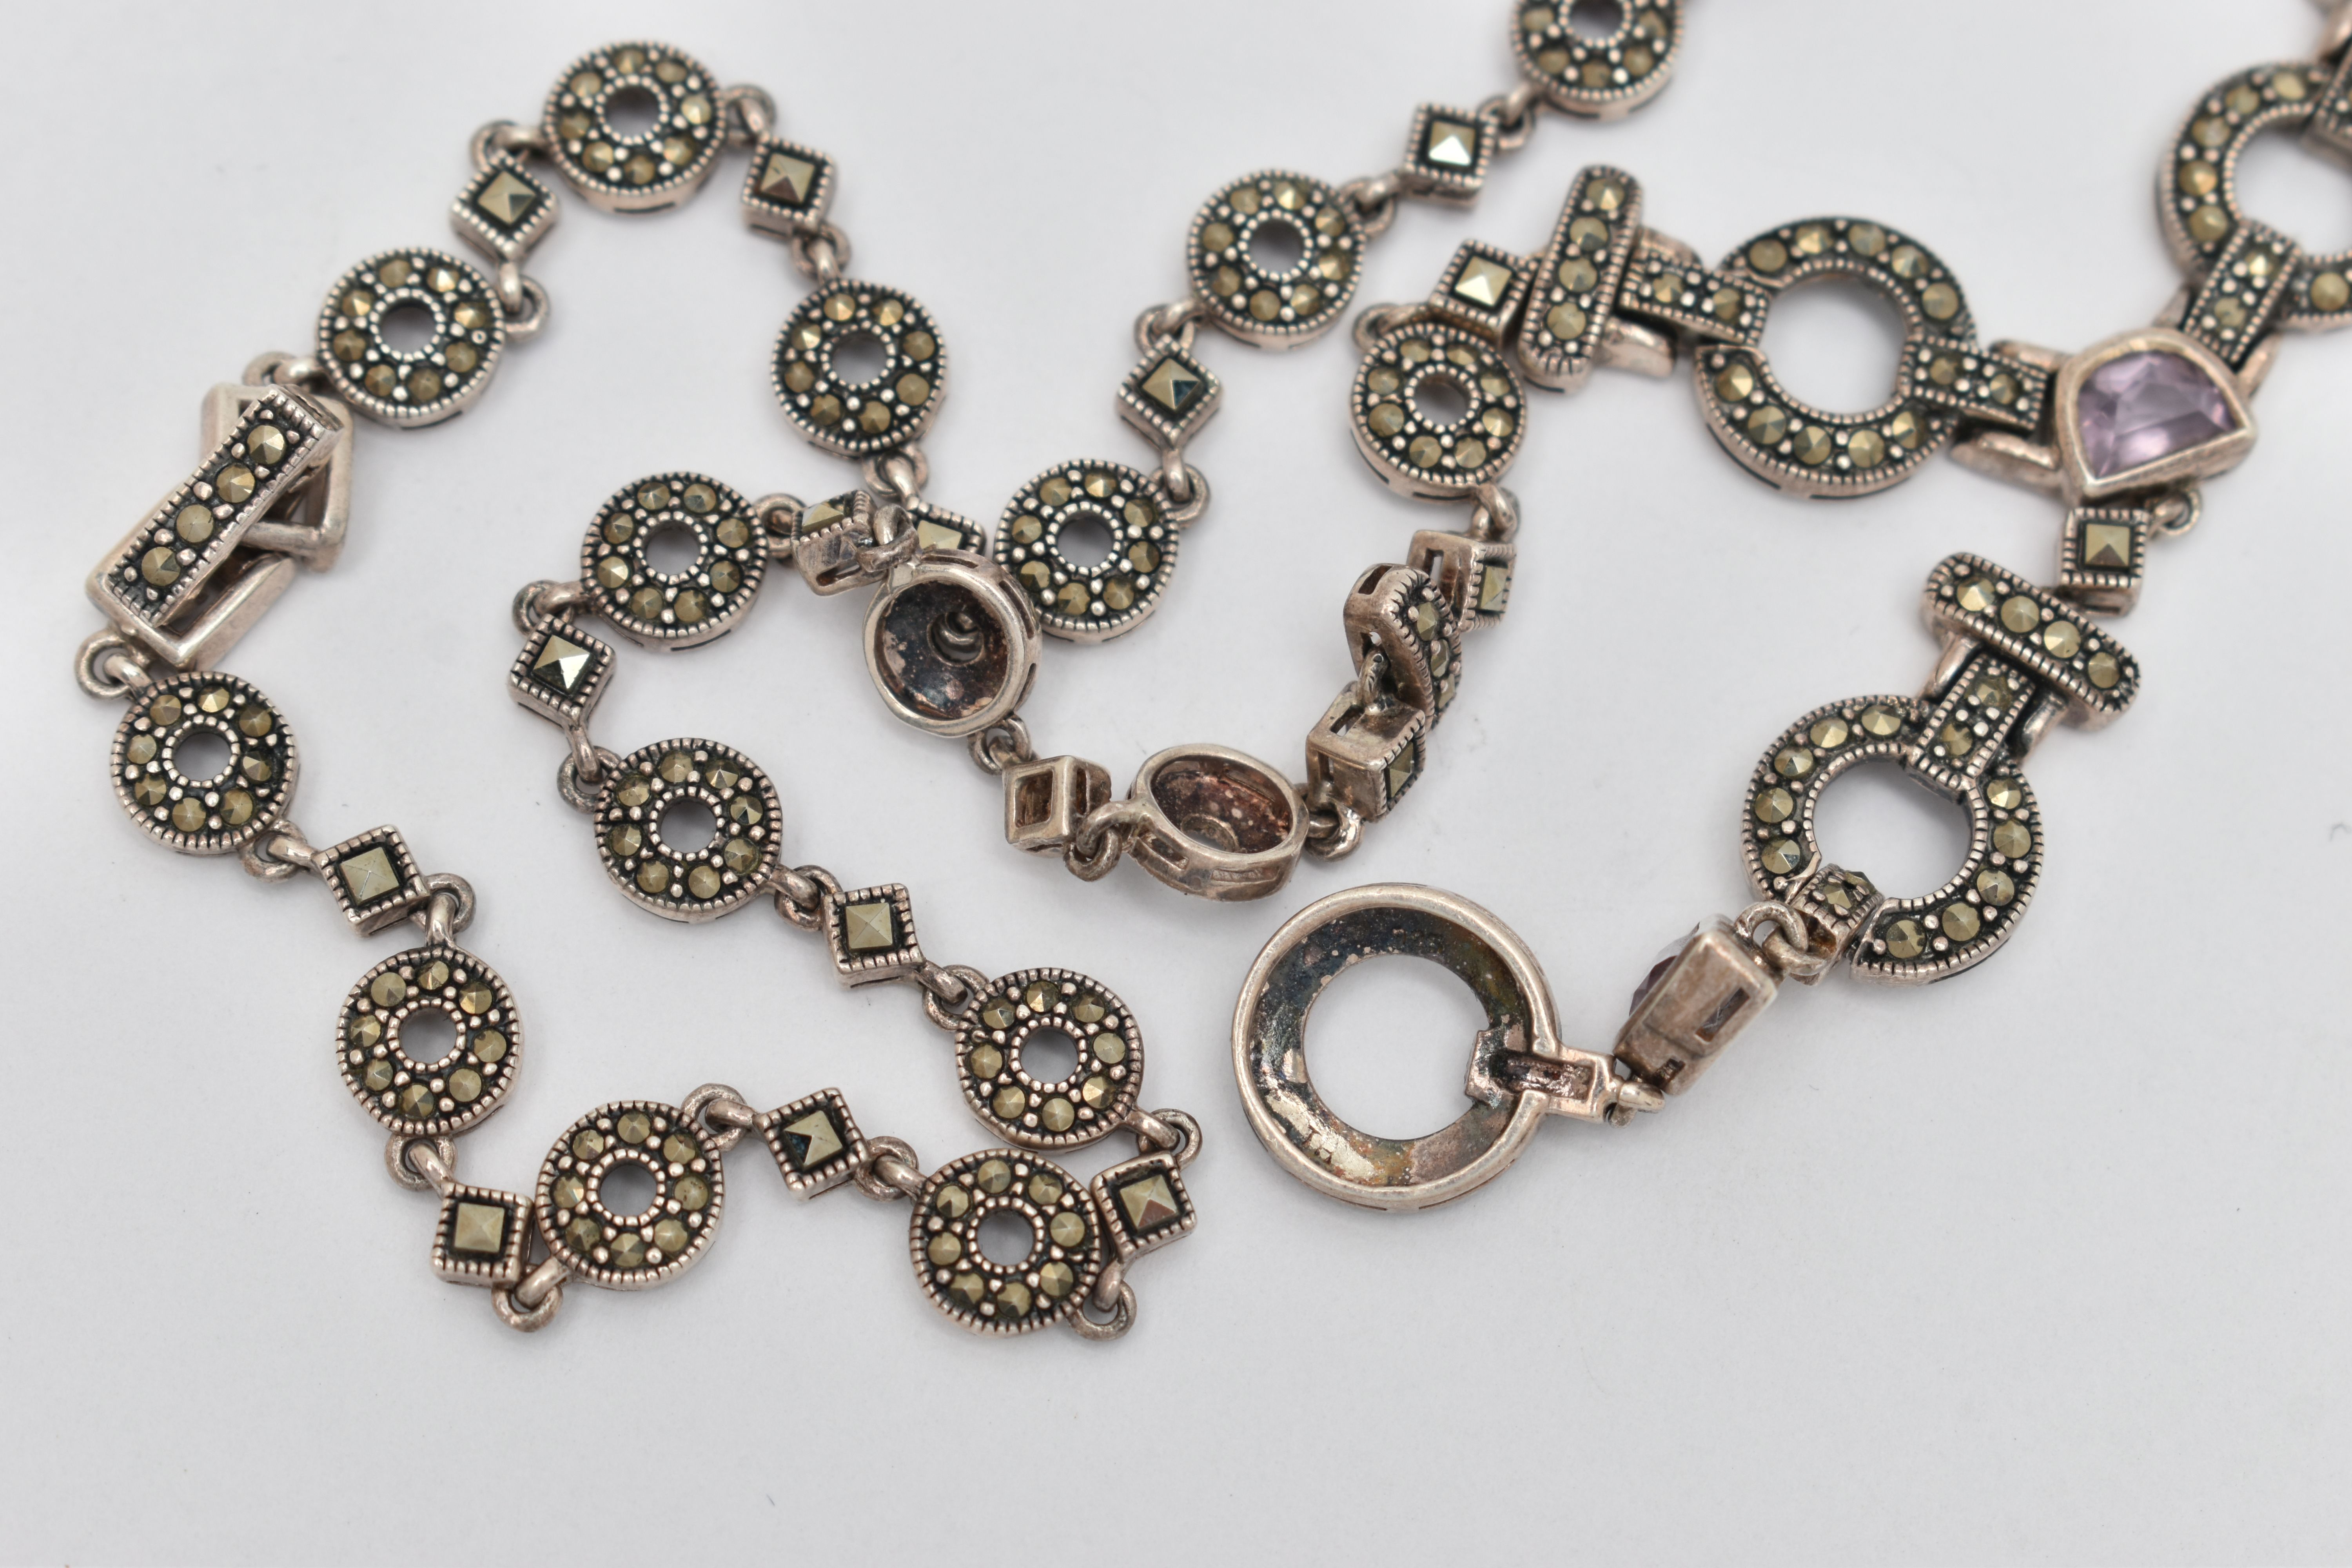 A MARCASITE AND AMETHYST NECKLACE, designed as circular, square and rectangular links joining at a - Image 3 of 5